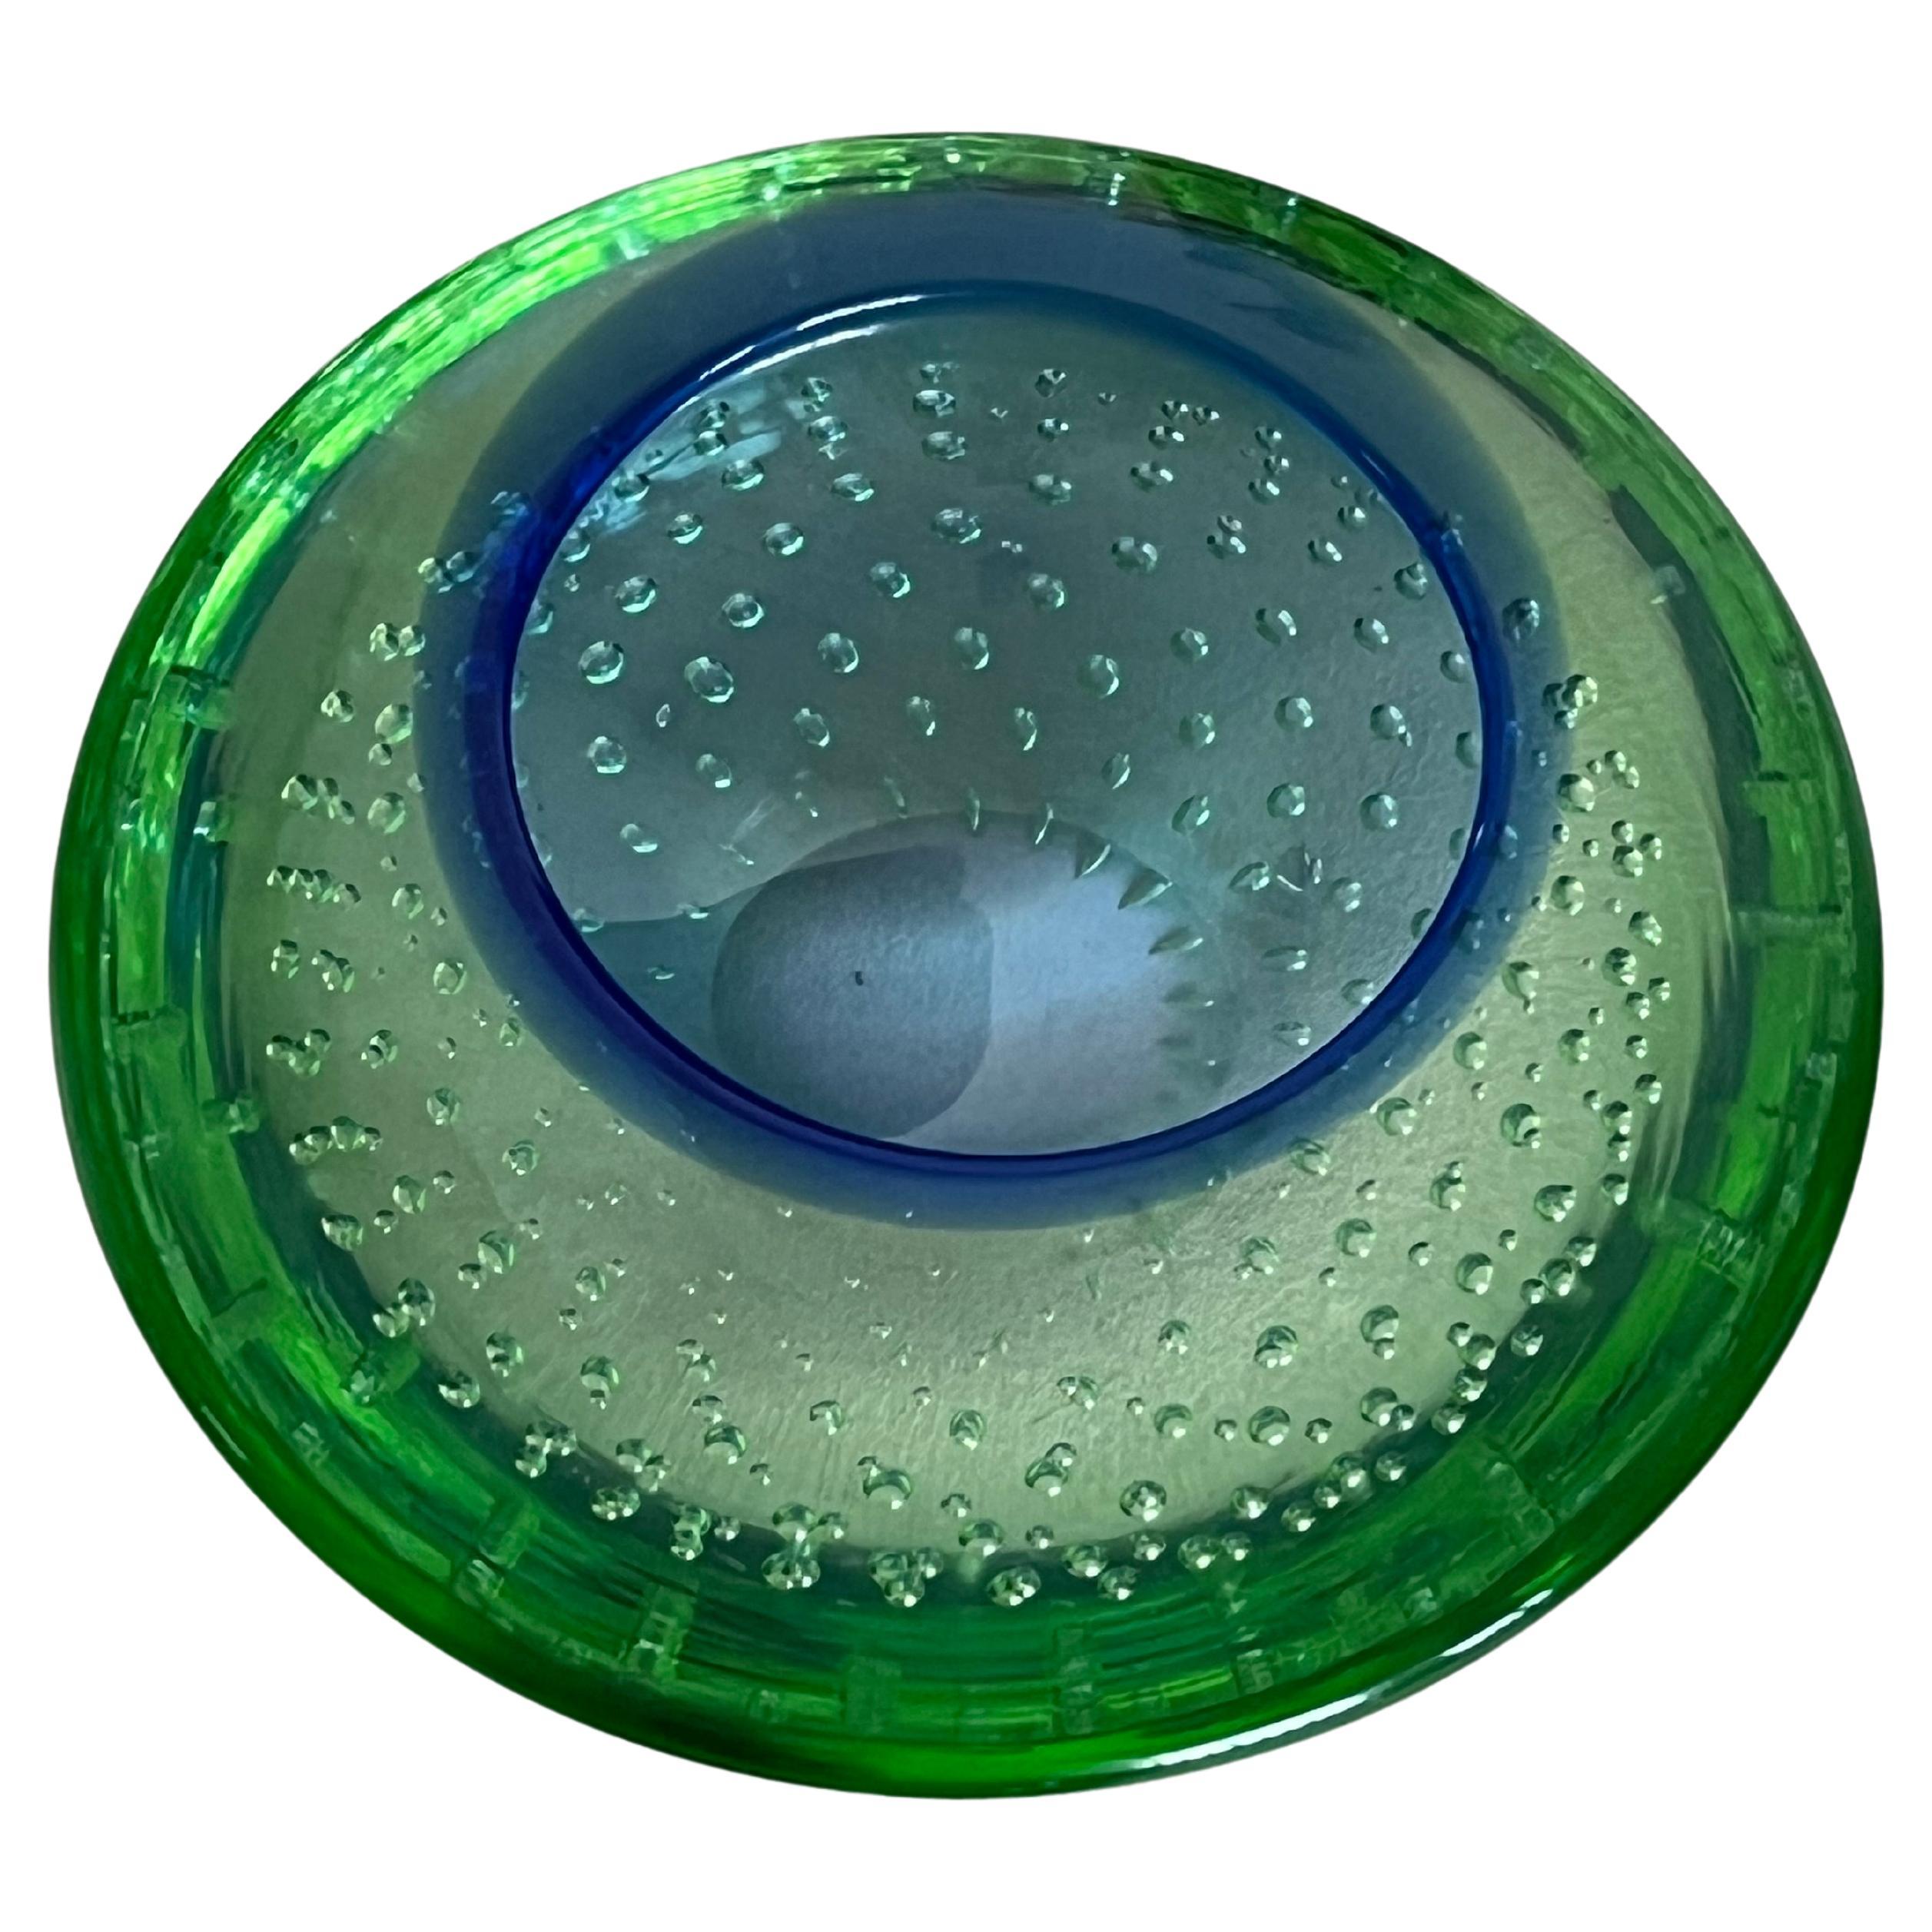 Vintage decorative Murano bowl/ashtray in green and blue “Sommerso” glass with included bubbles.

Highly collectible, mesmerizing and timeless, Murano glass is one of the most fascinating materials in the world. Used since the 14th century to create